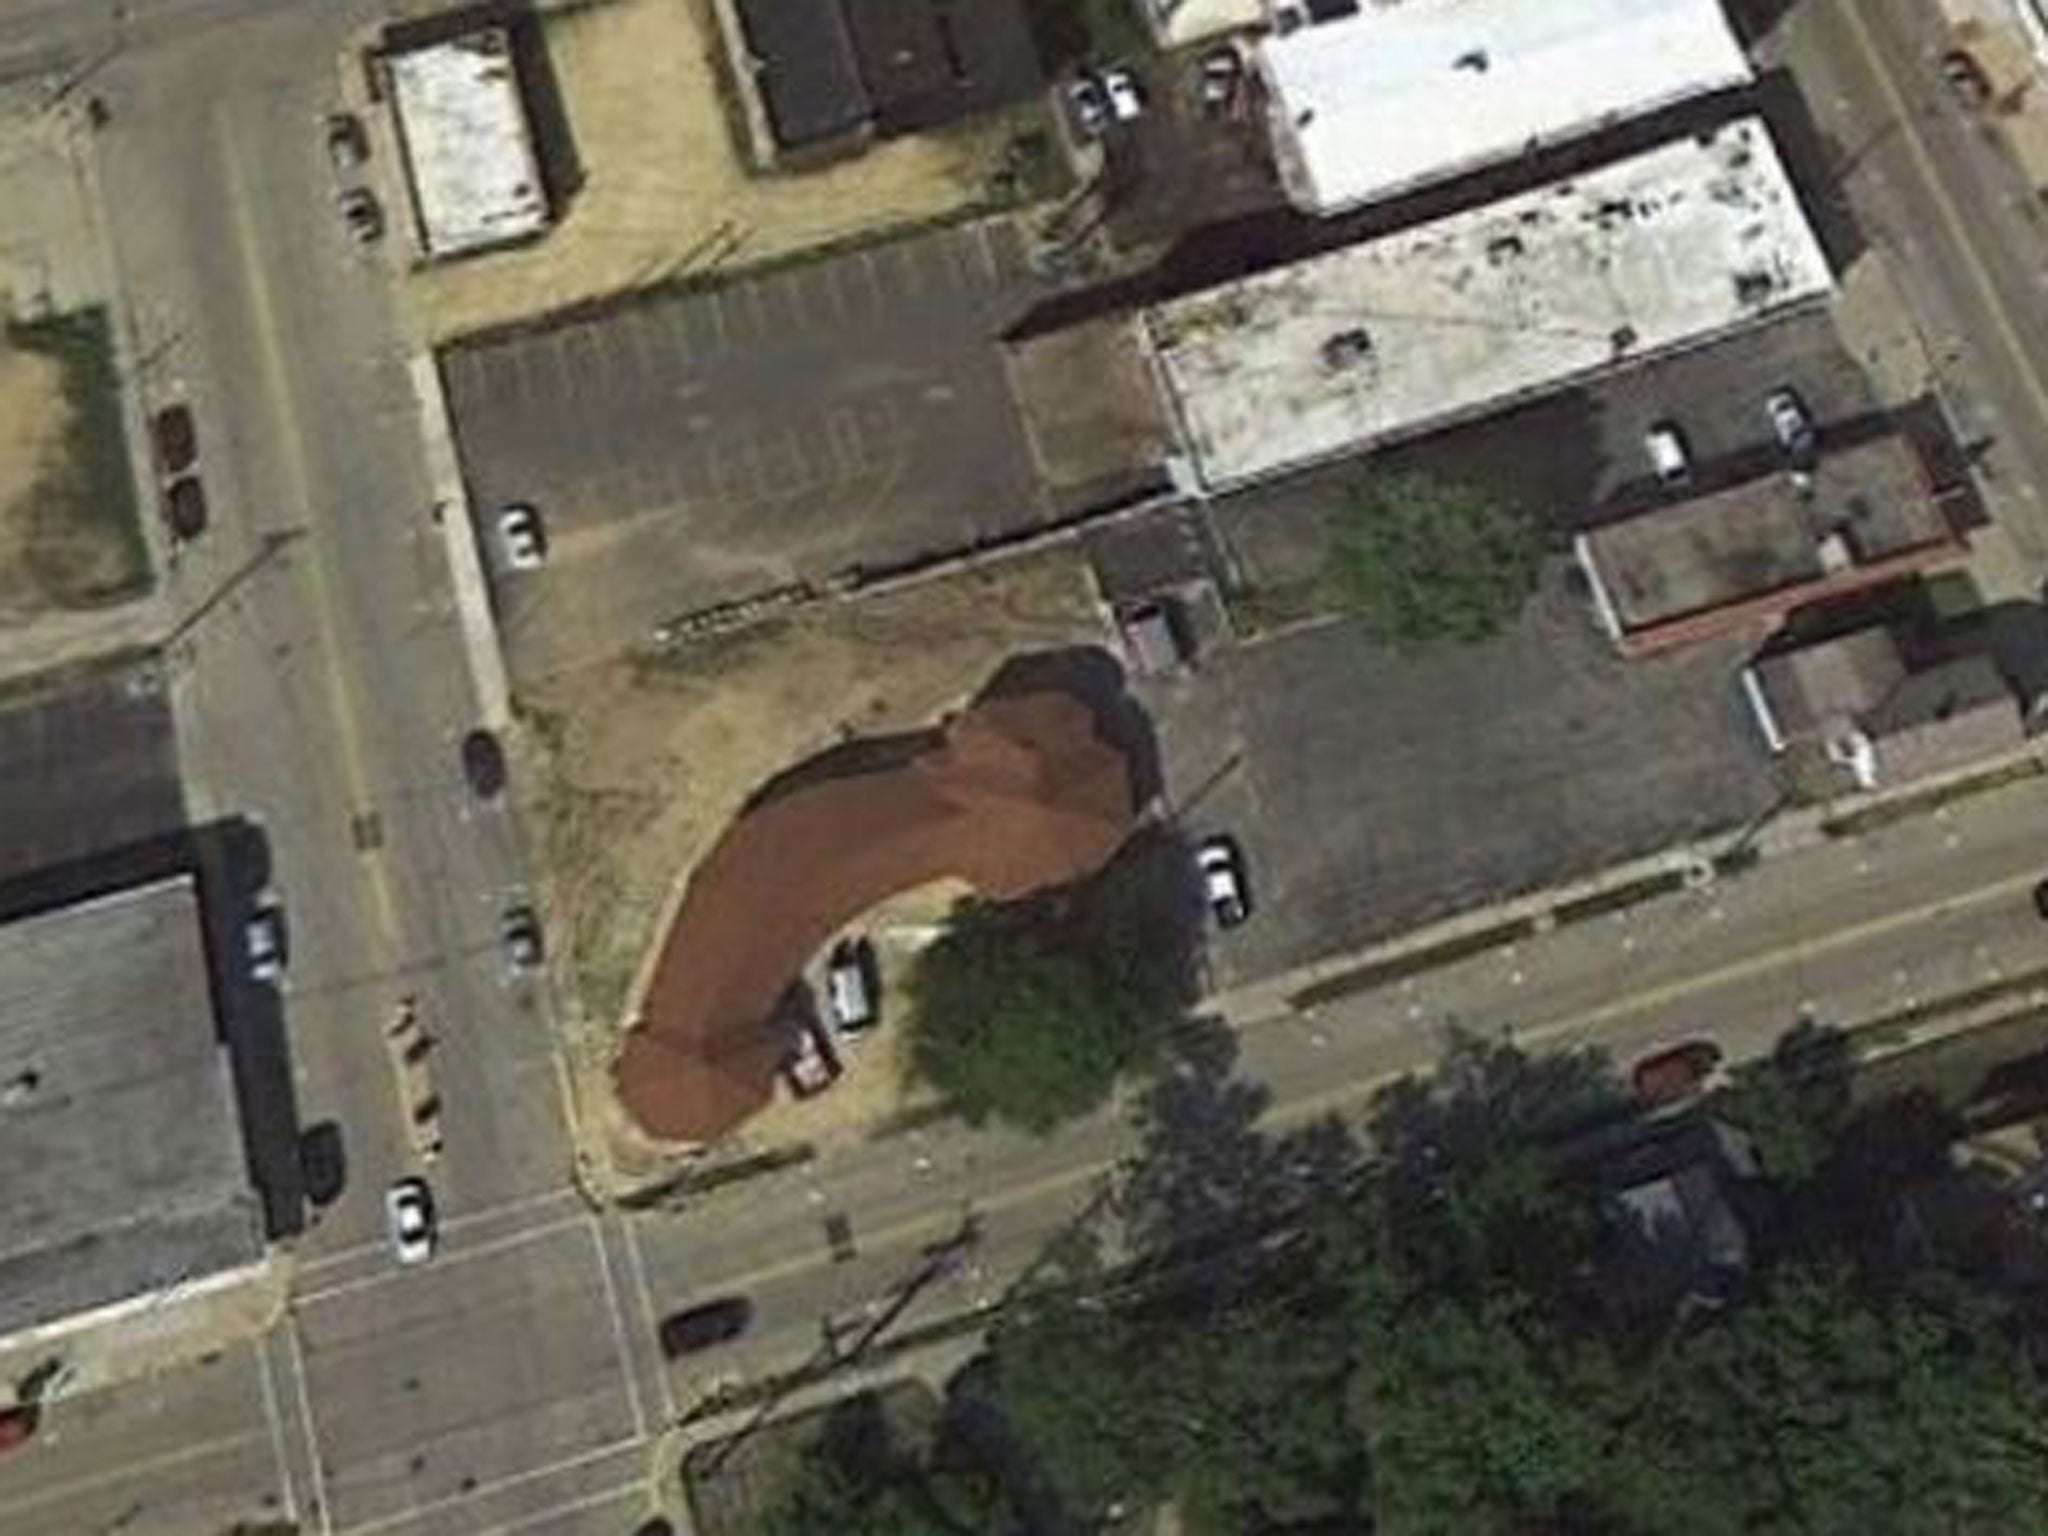 An ariel view of the church captured on Google Earth